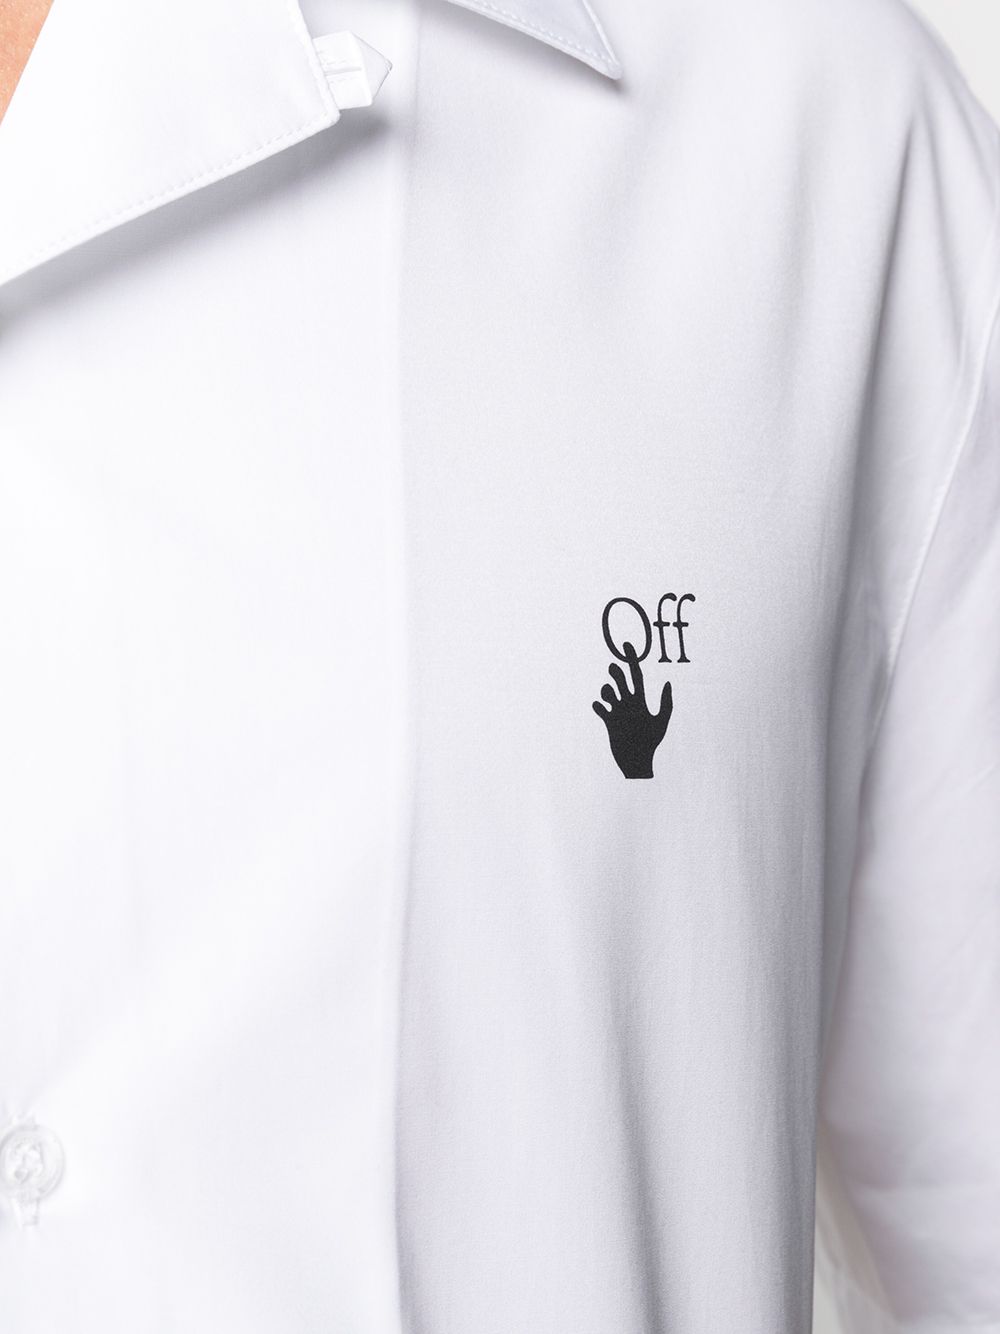 off white shirt with hand logo